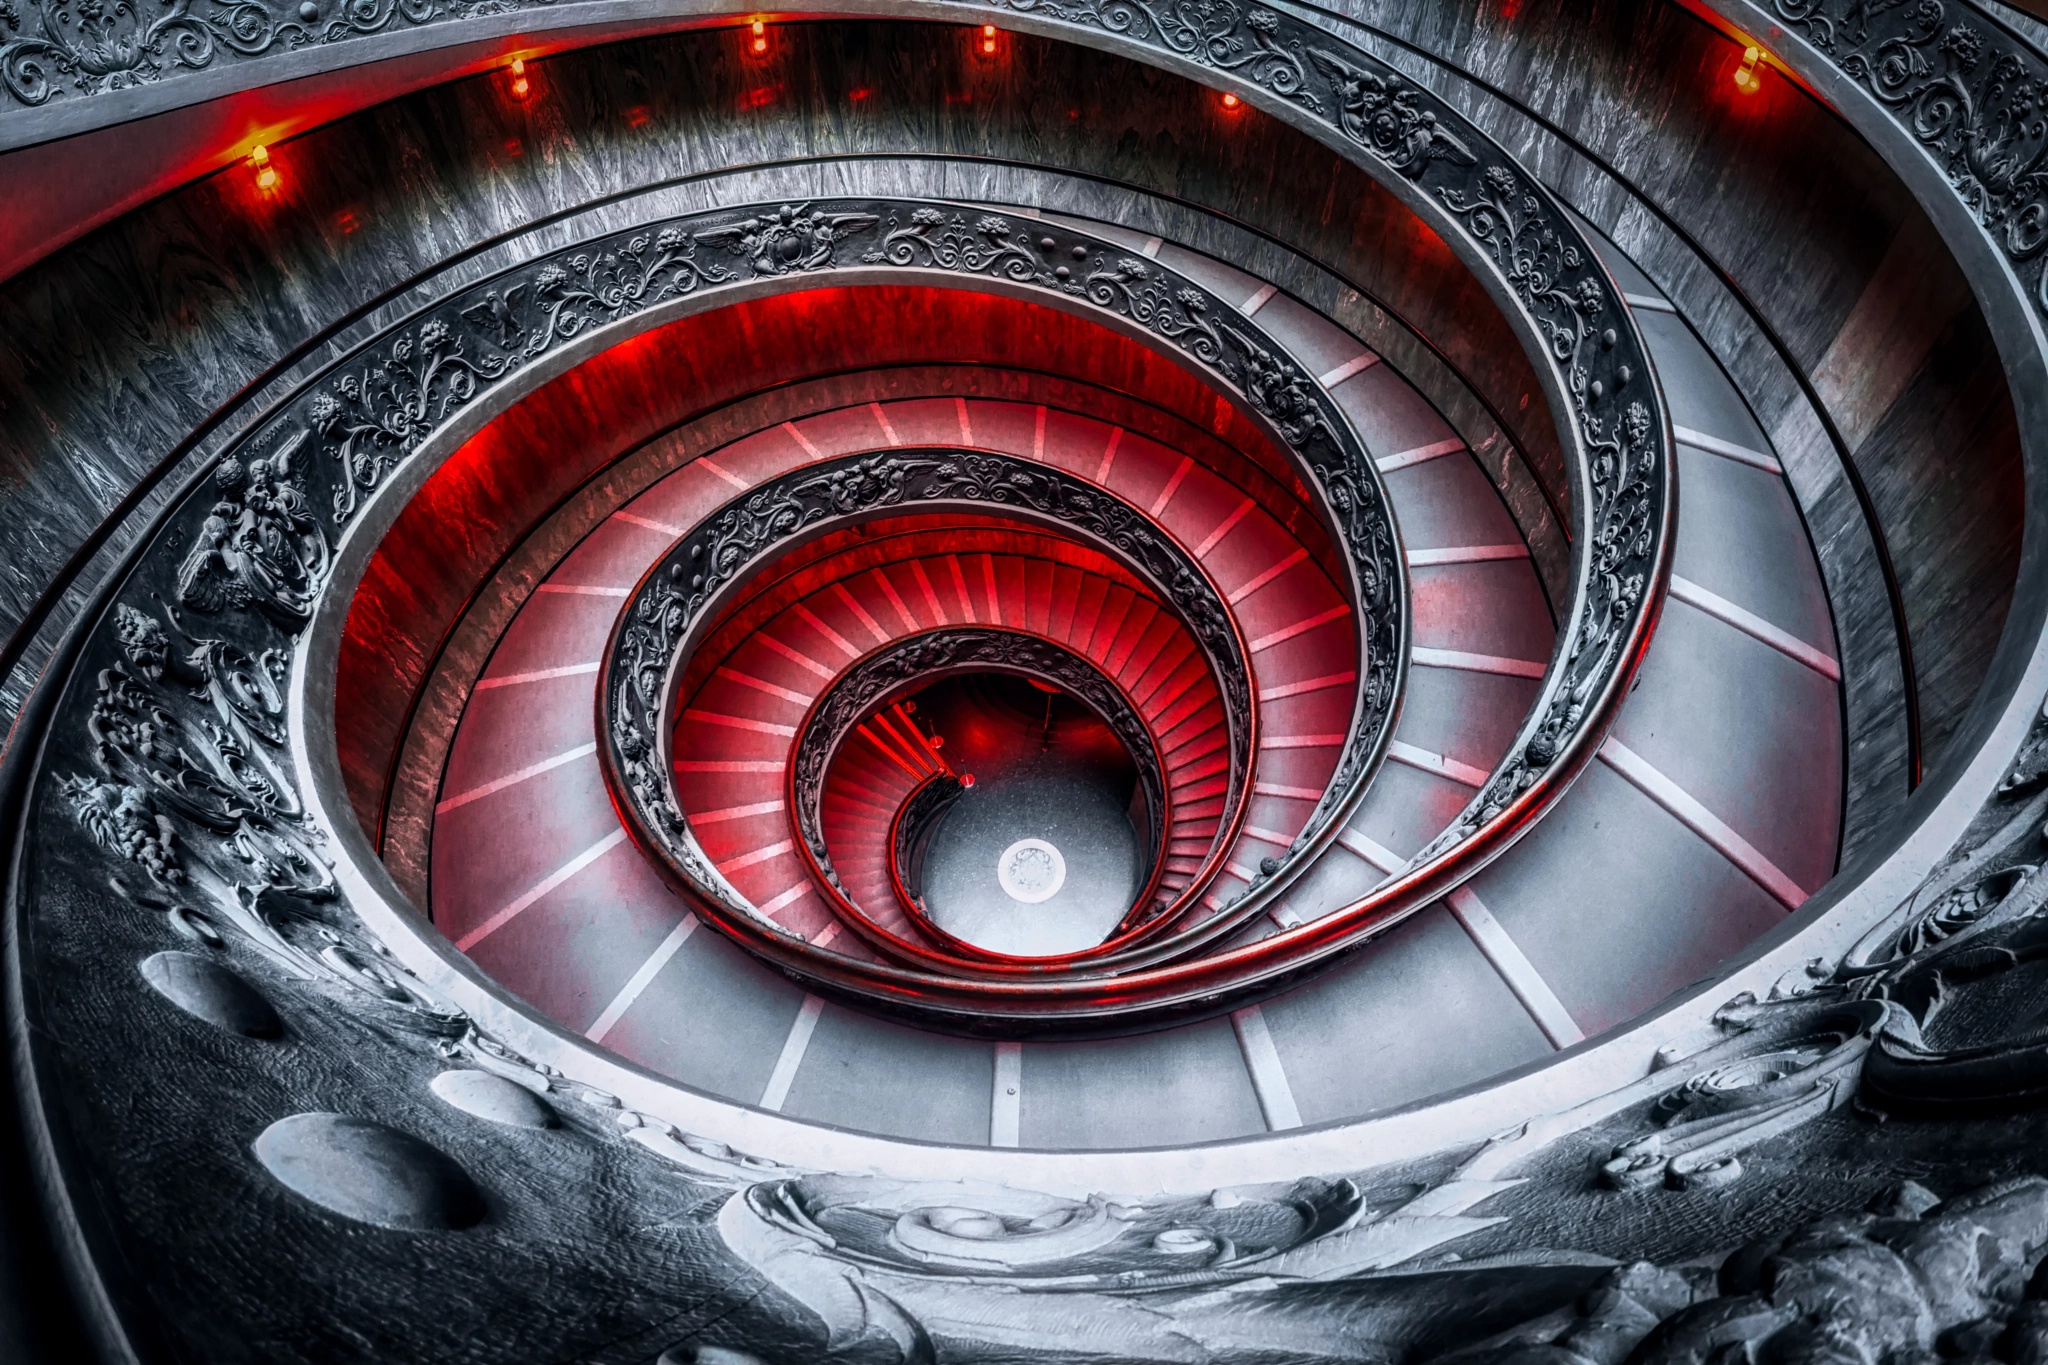 General 2048x1365 Vatican City architecture stairs building indoors Rome Italy